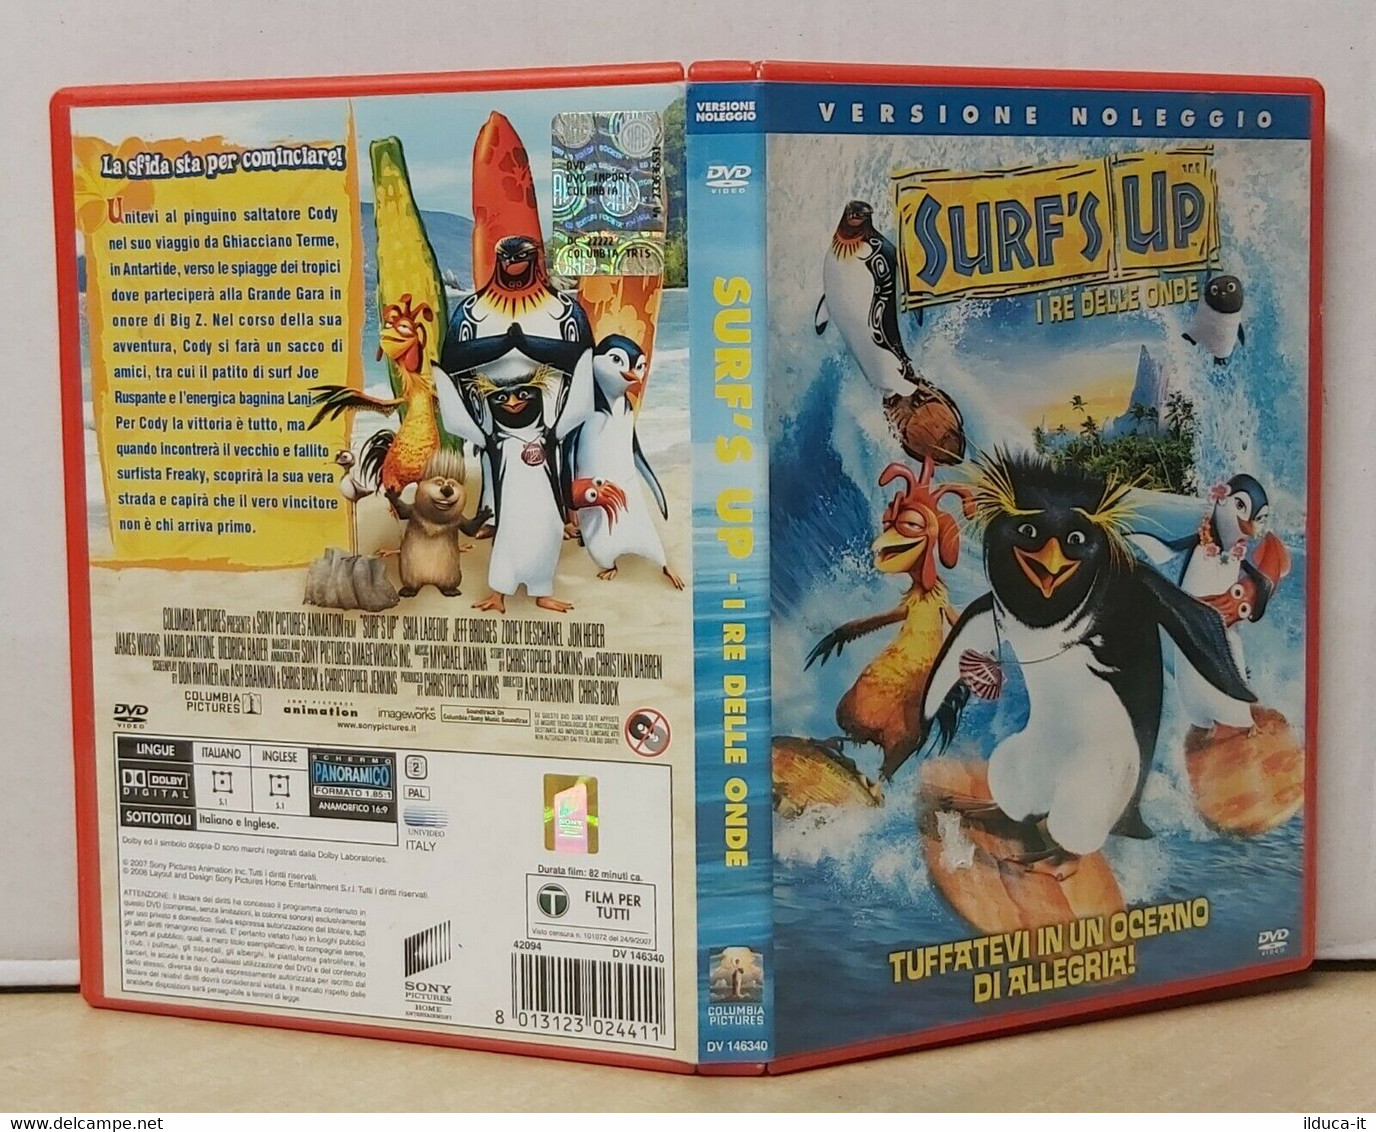 00087 DVD - SURF'S UP I Re Delle Onde - Columbia Picture 2008 - Cartoons